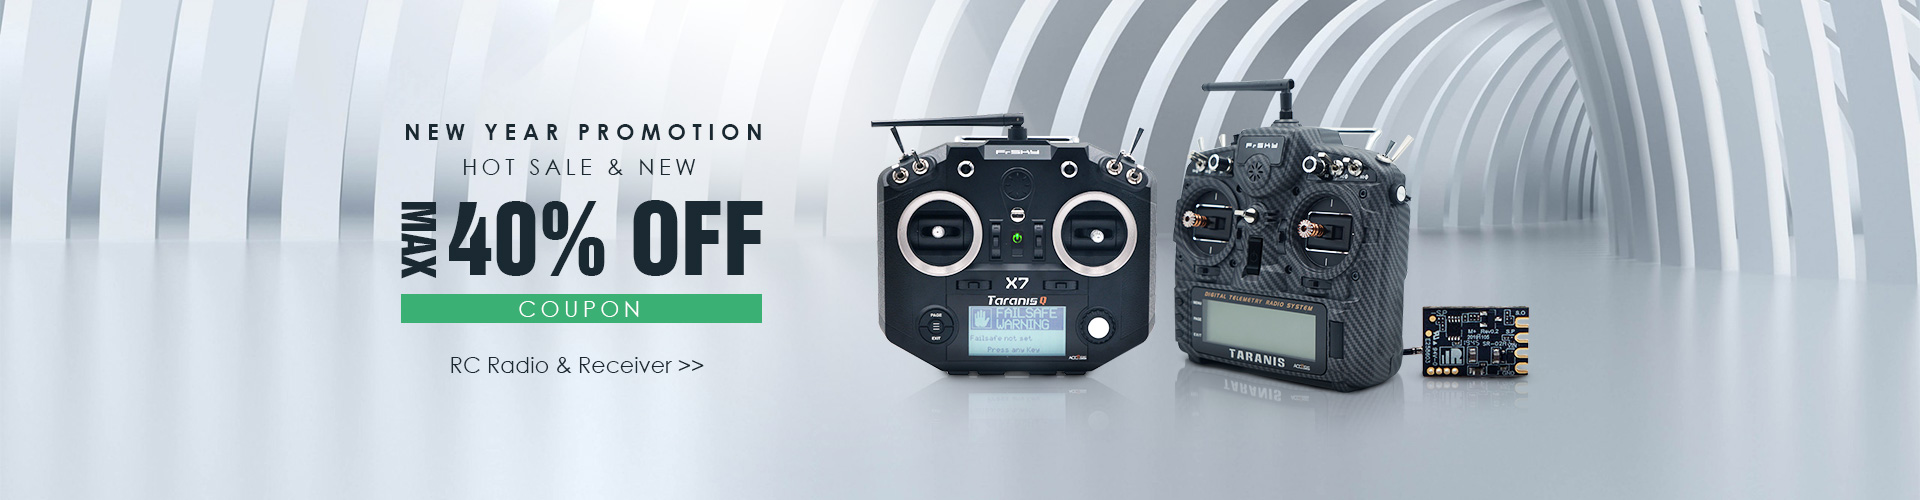 New Year Promotion and MAX 40% OFF Coupon for RC Radio & Receiver